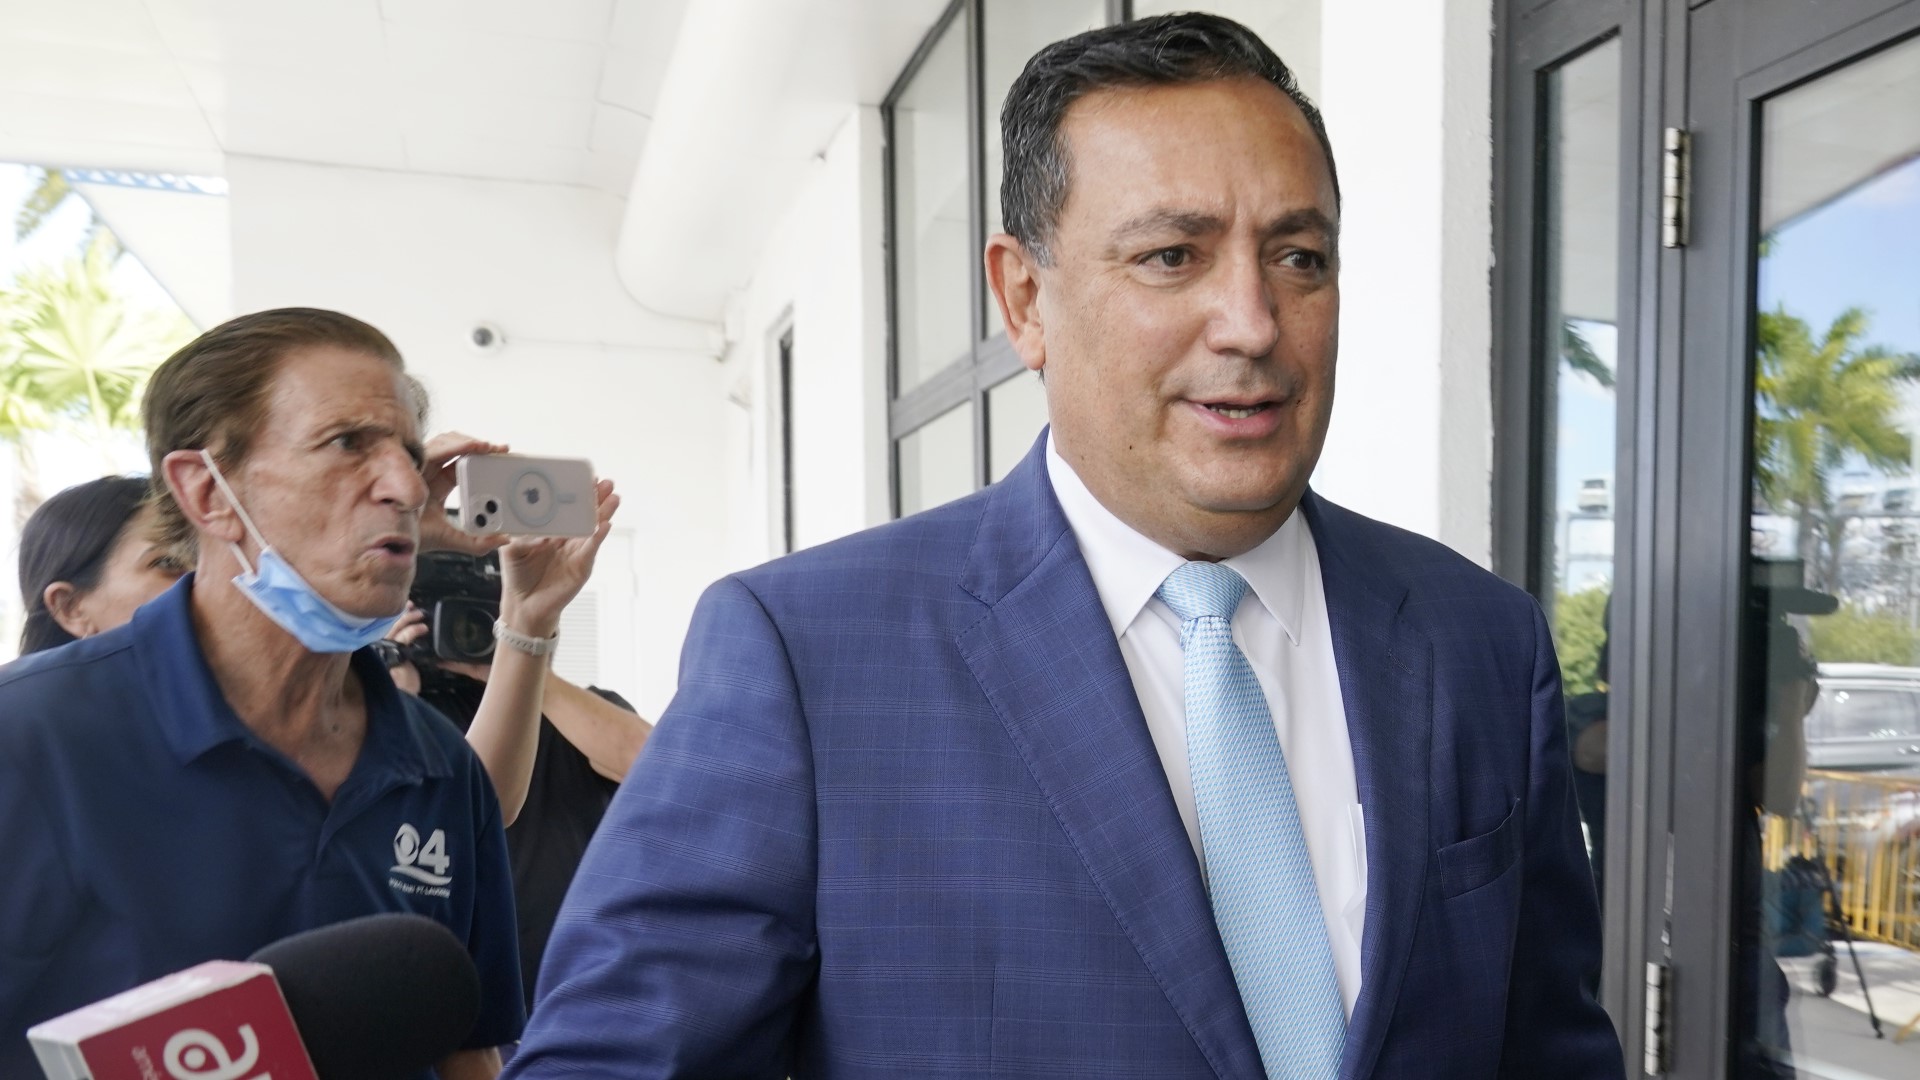 According to the Miami Herald, Acevedo's federal lawsuit claims he was targeted after blowing the whistle on alleged corruption at City Hall.